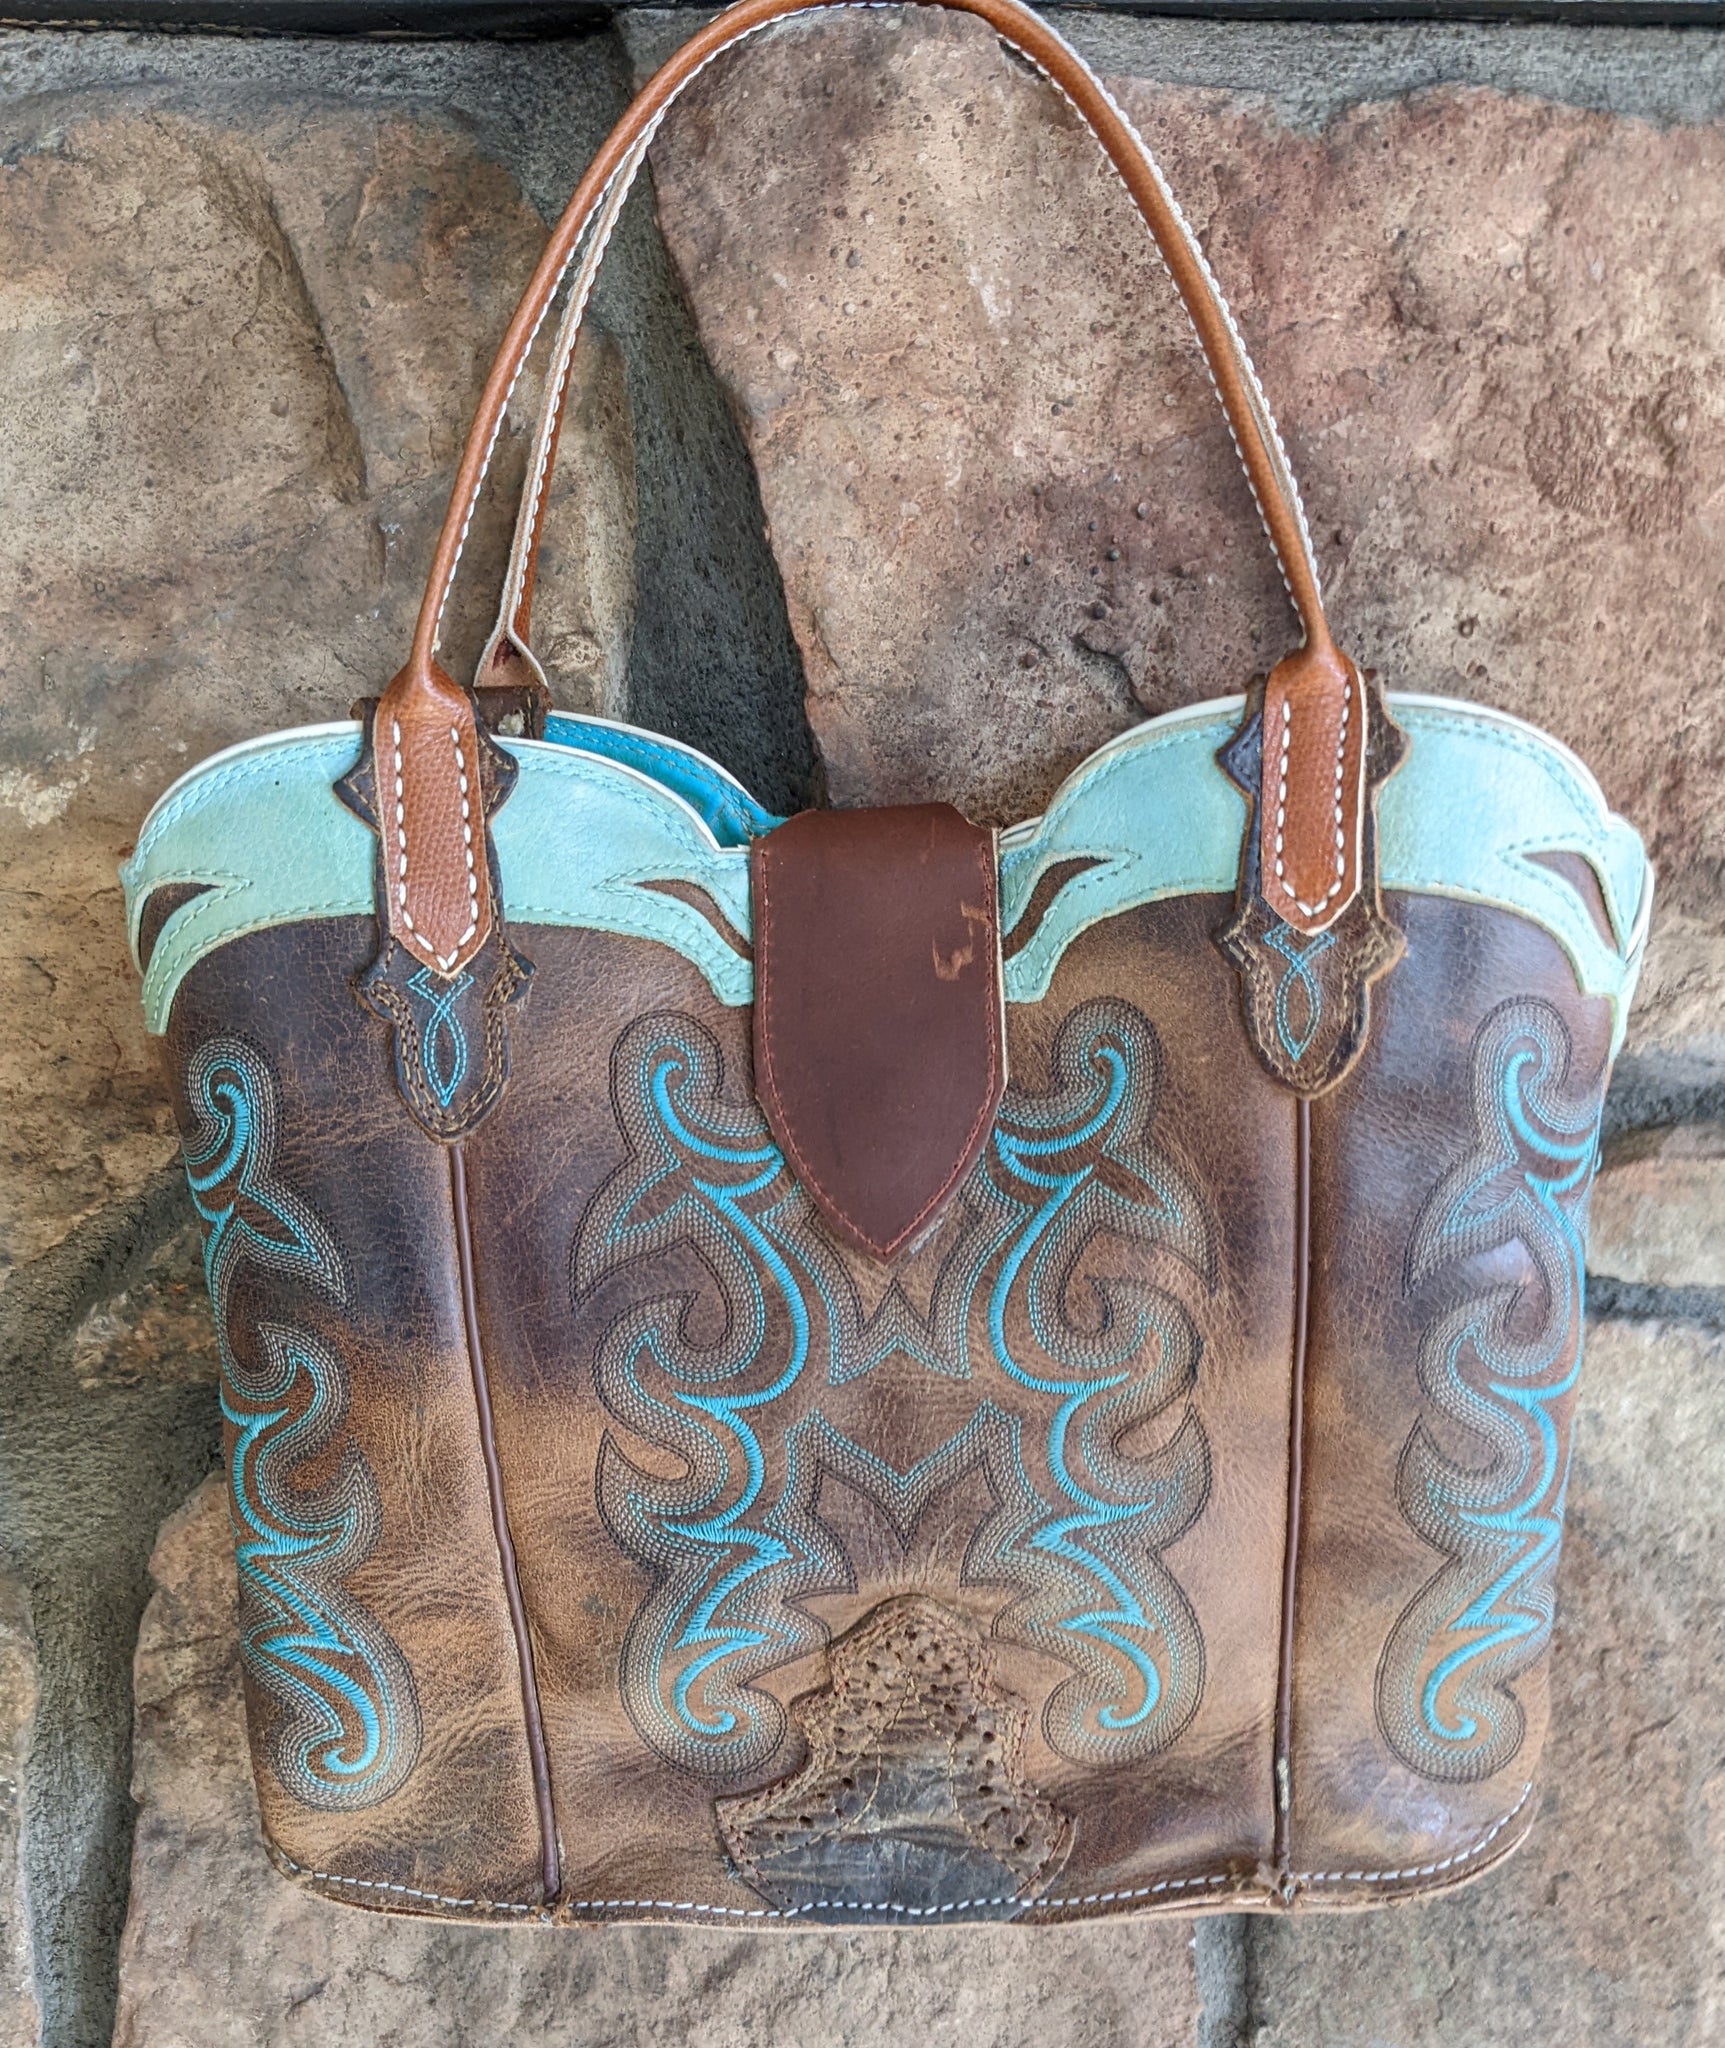 Diamond 57 Cowboy Boot Purses & Leather Goods - You're in my heart and in  my soul.... Rod Stewart said it best. You'll fall in love with this custom  made purse. The